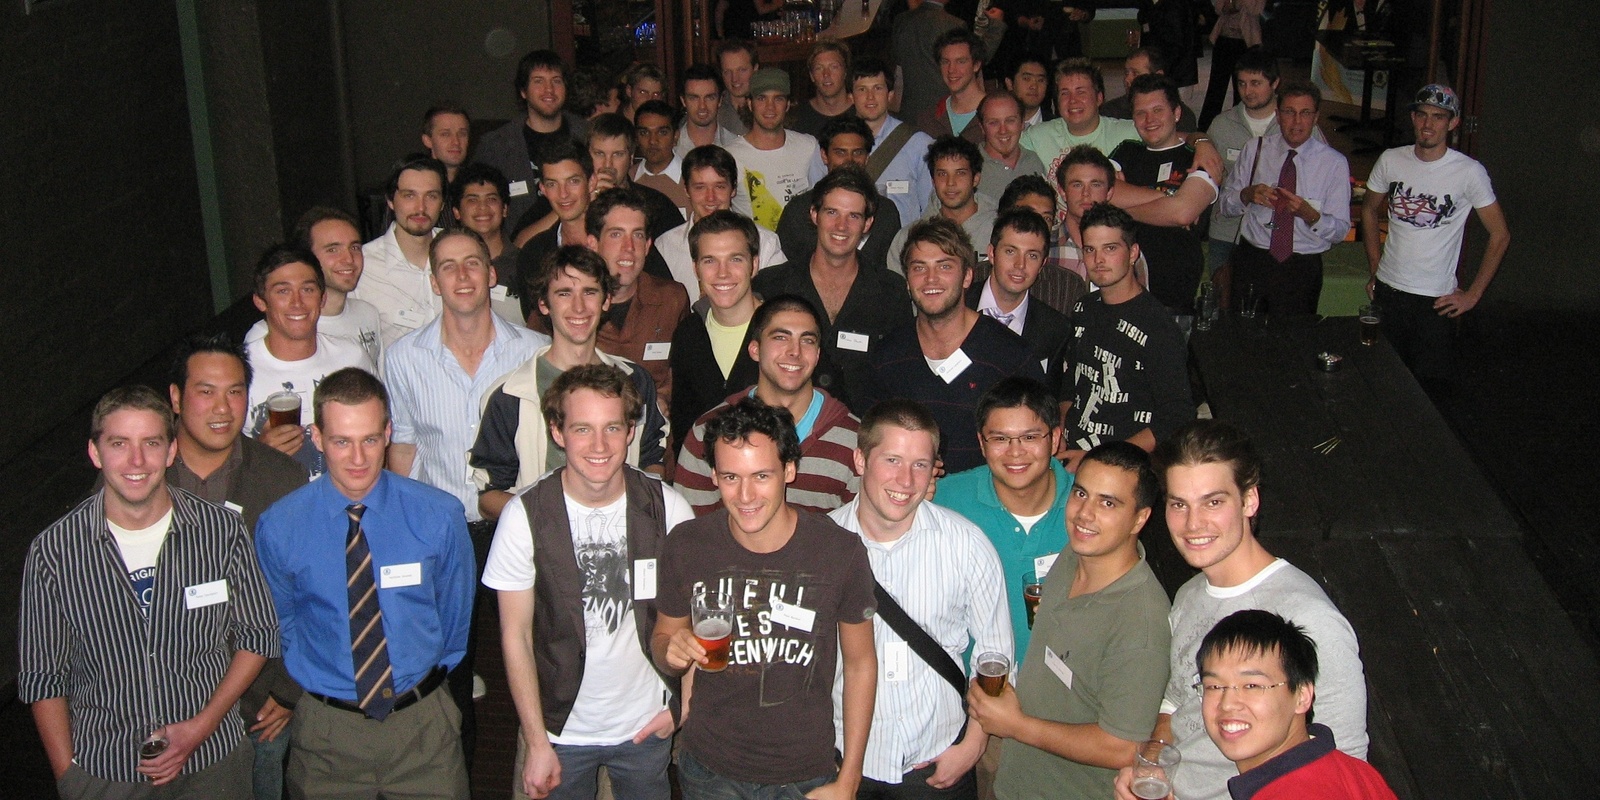 Banner image for 20 Year Reunion (Class of 2003)